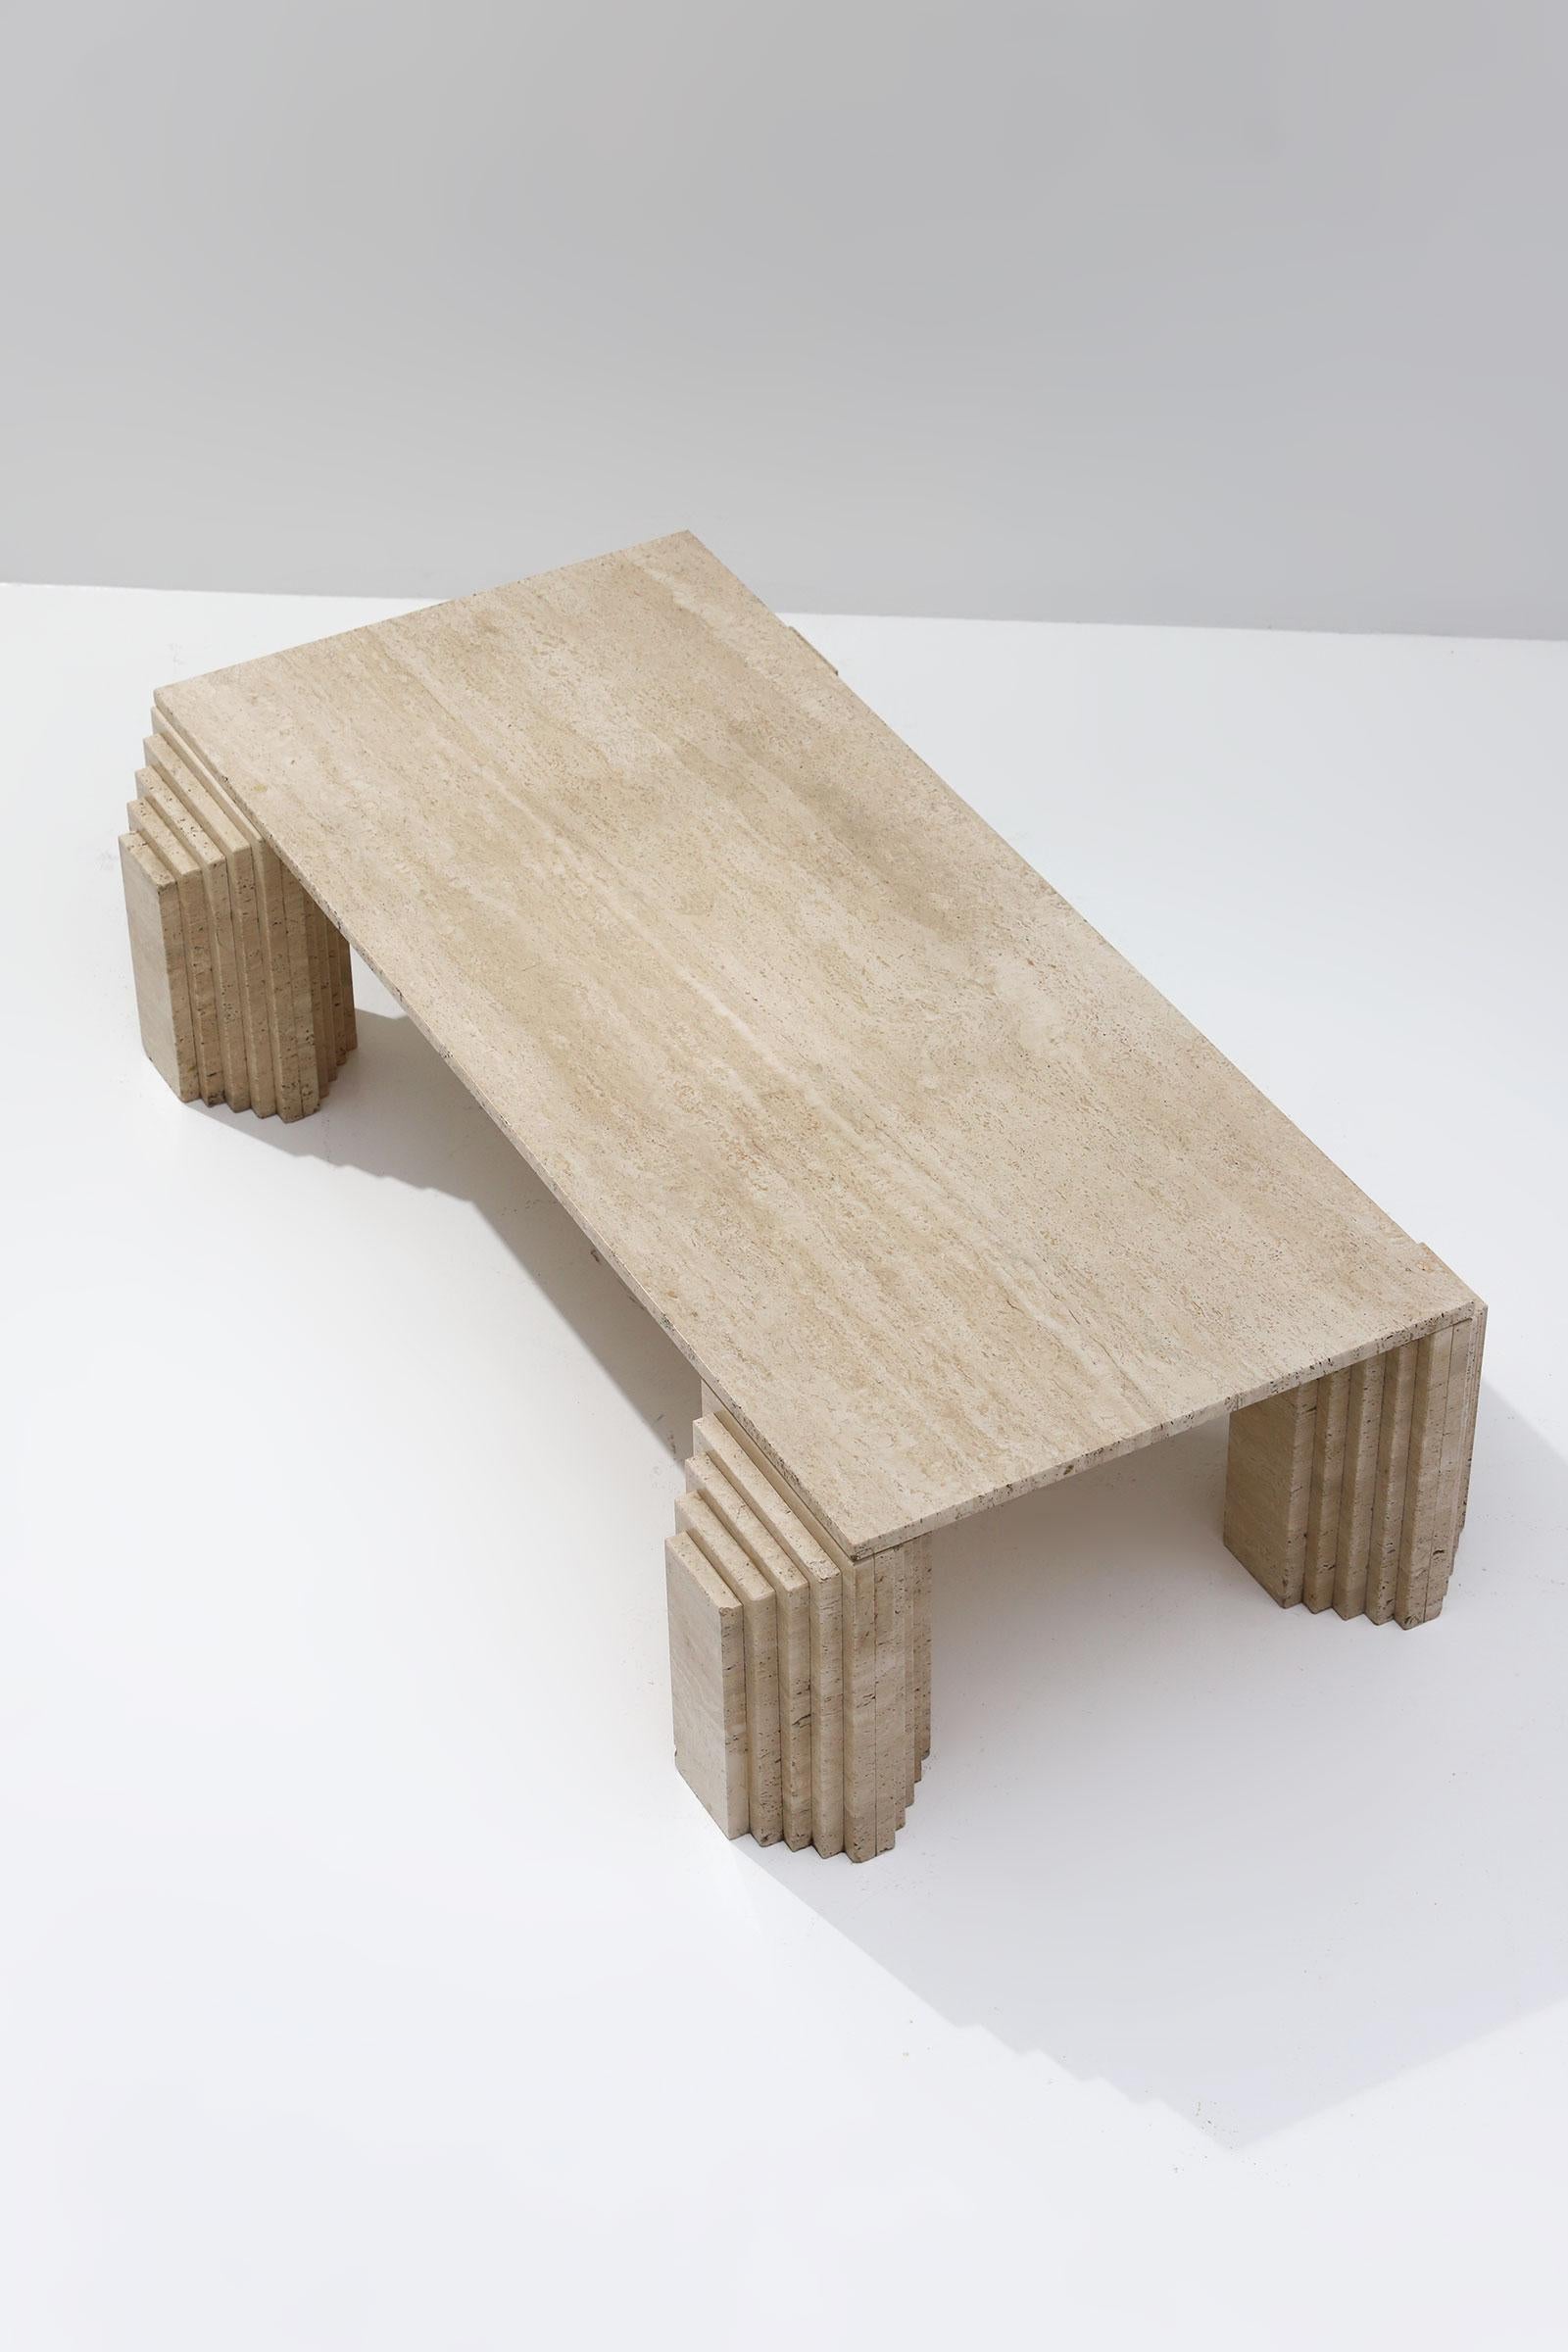 Scarpa, travertine, coffee table, Postmodern, Italy, 1970s

Beautiful travertine coffee table made in the 1970s. The rectangular tabletop rests on four block legs that have a stair-shaped architectural form. The high legs and a variegated color